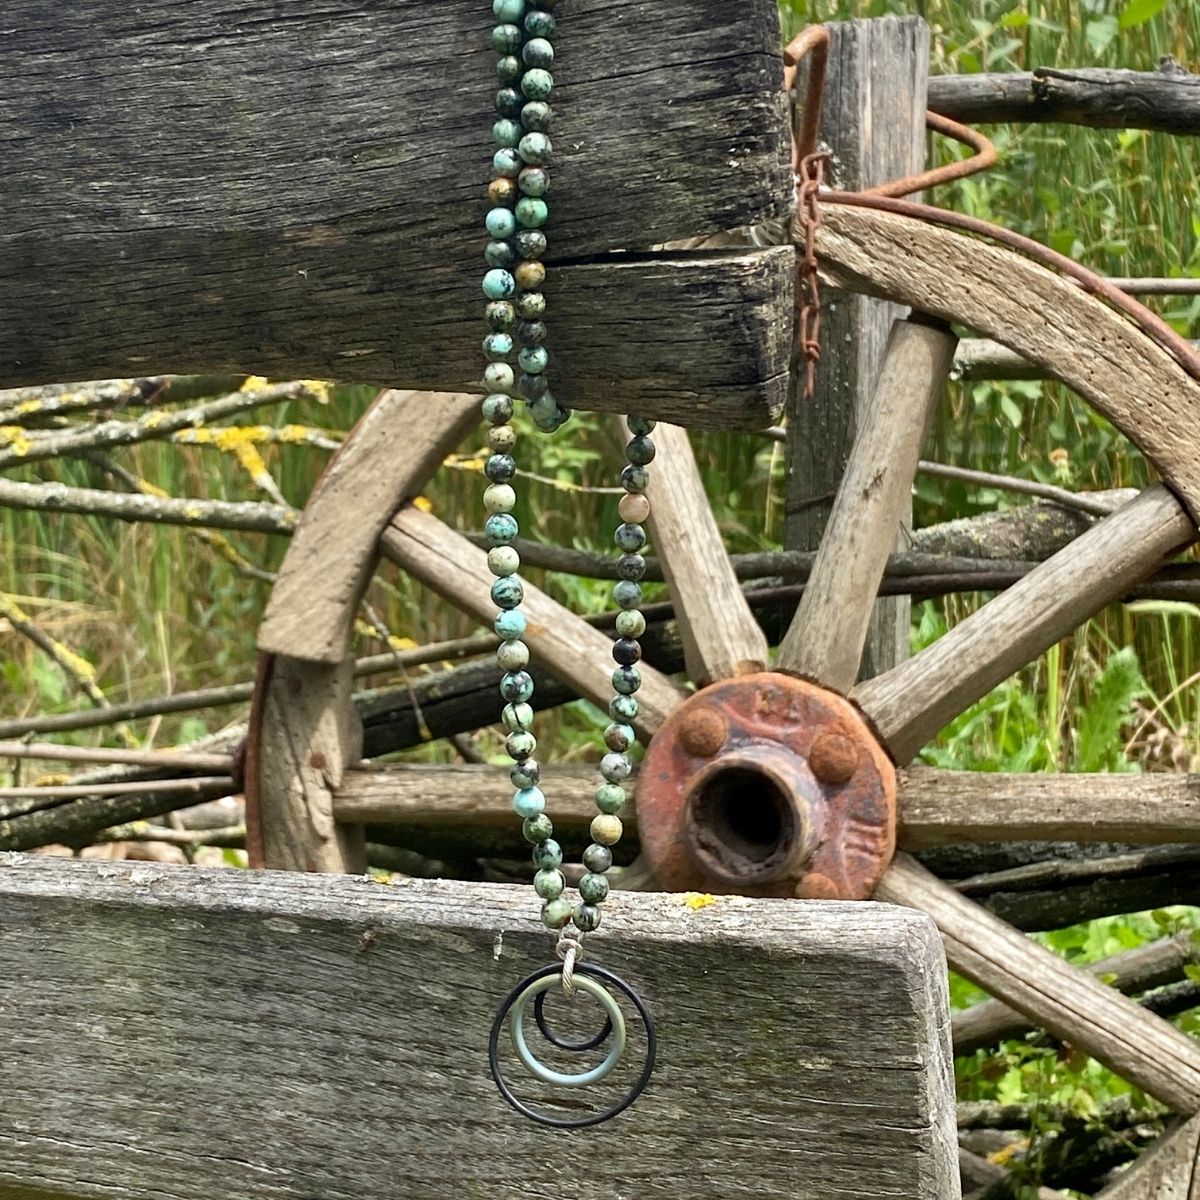 Zero Waste Necklace with up-recycled SCUBA parts and African Turquoise